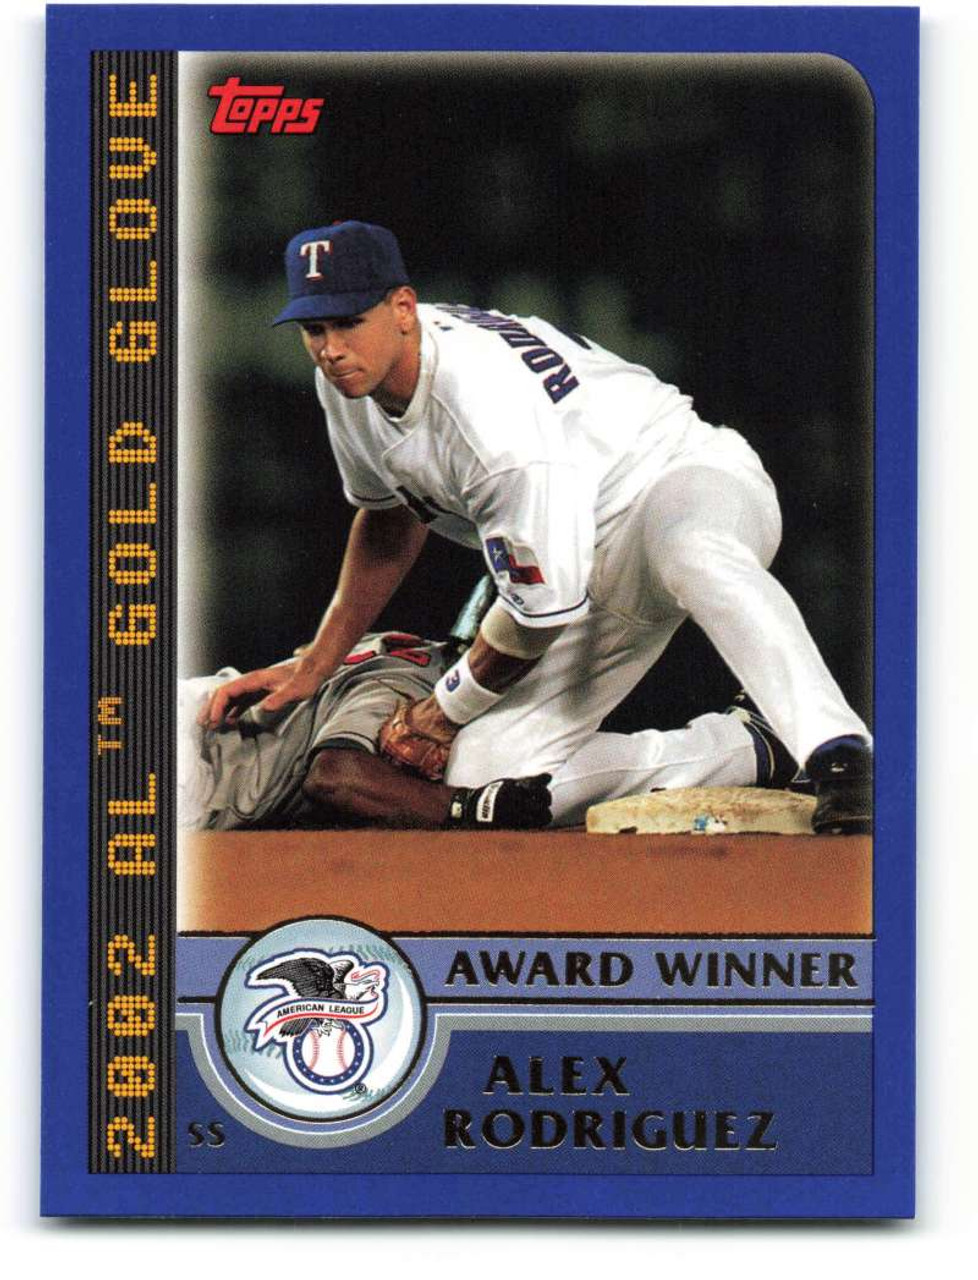 2003 Topps #690 Alex Rodriguez AW VG Texas Rangers - Under the